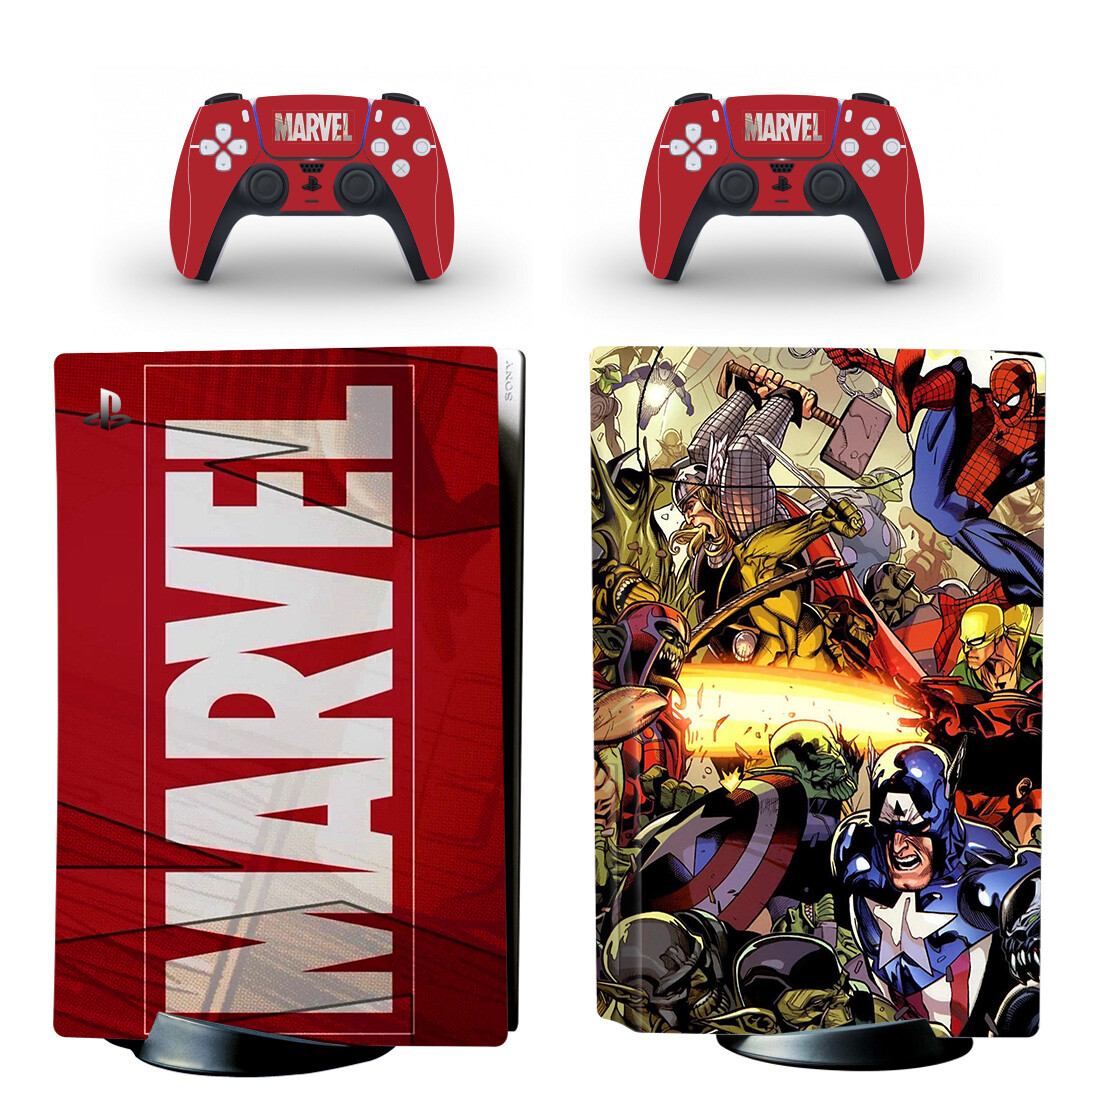 Marvel Skin Sticker For PS5 Skin And Controllers